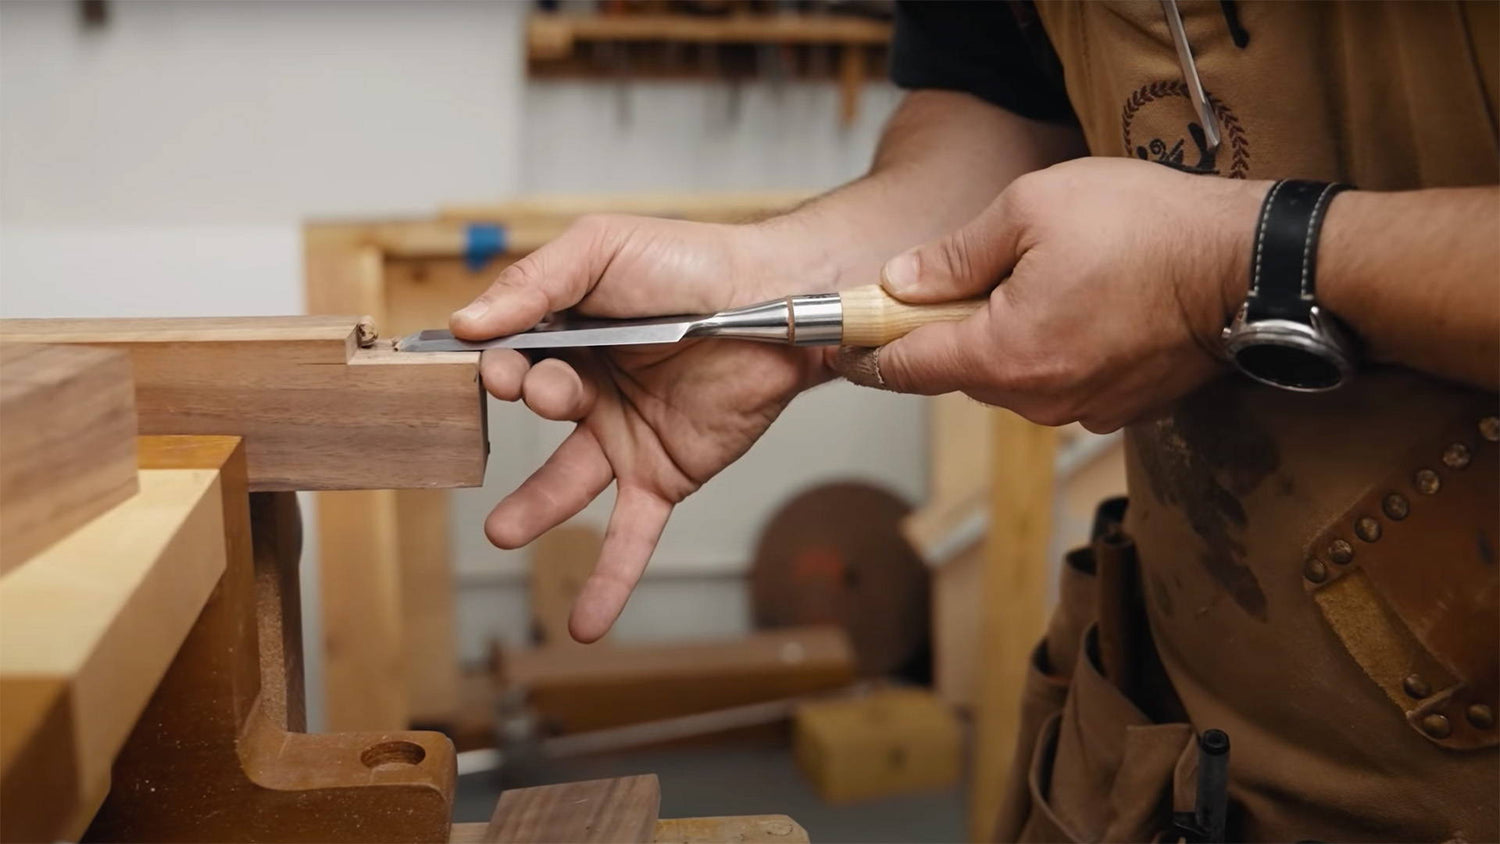 Japanese Woodworking Tools - Everything You Ever Wanted to Know